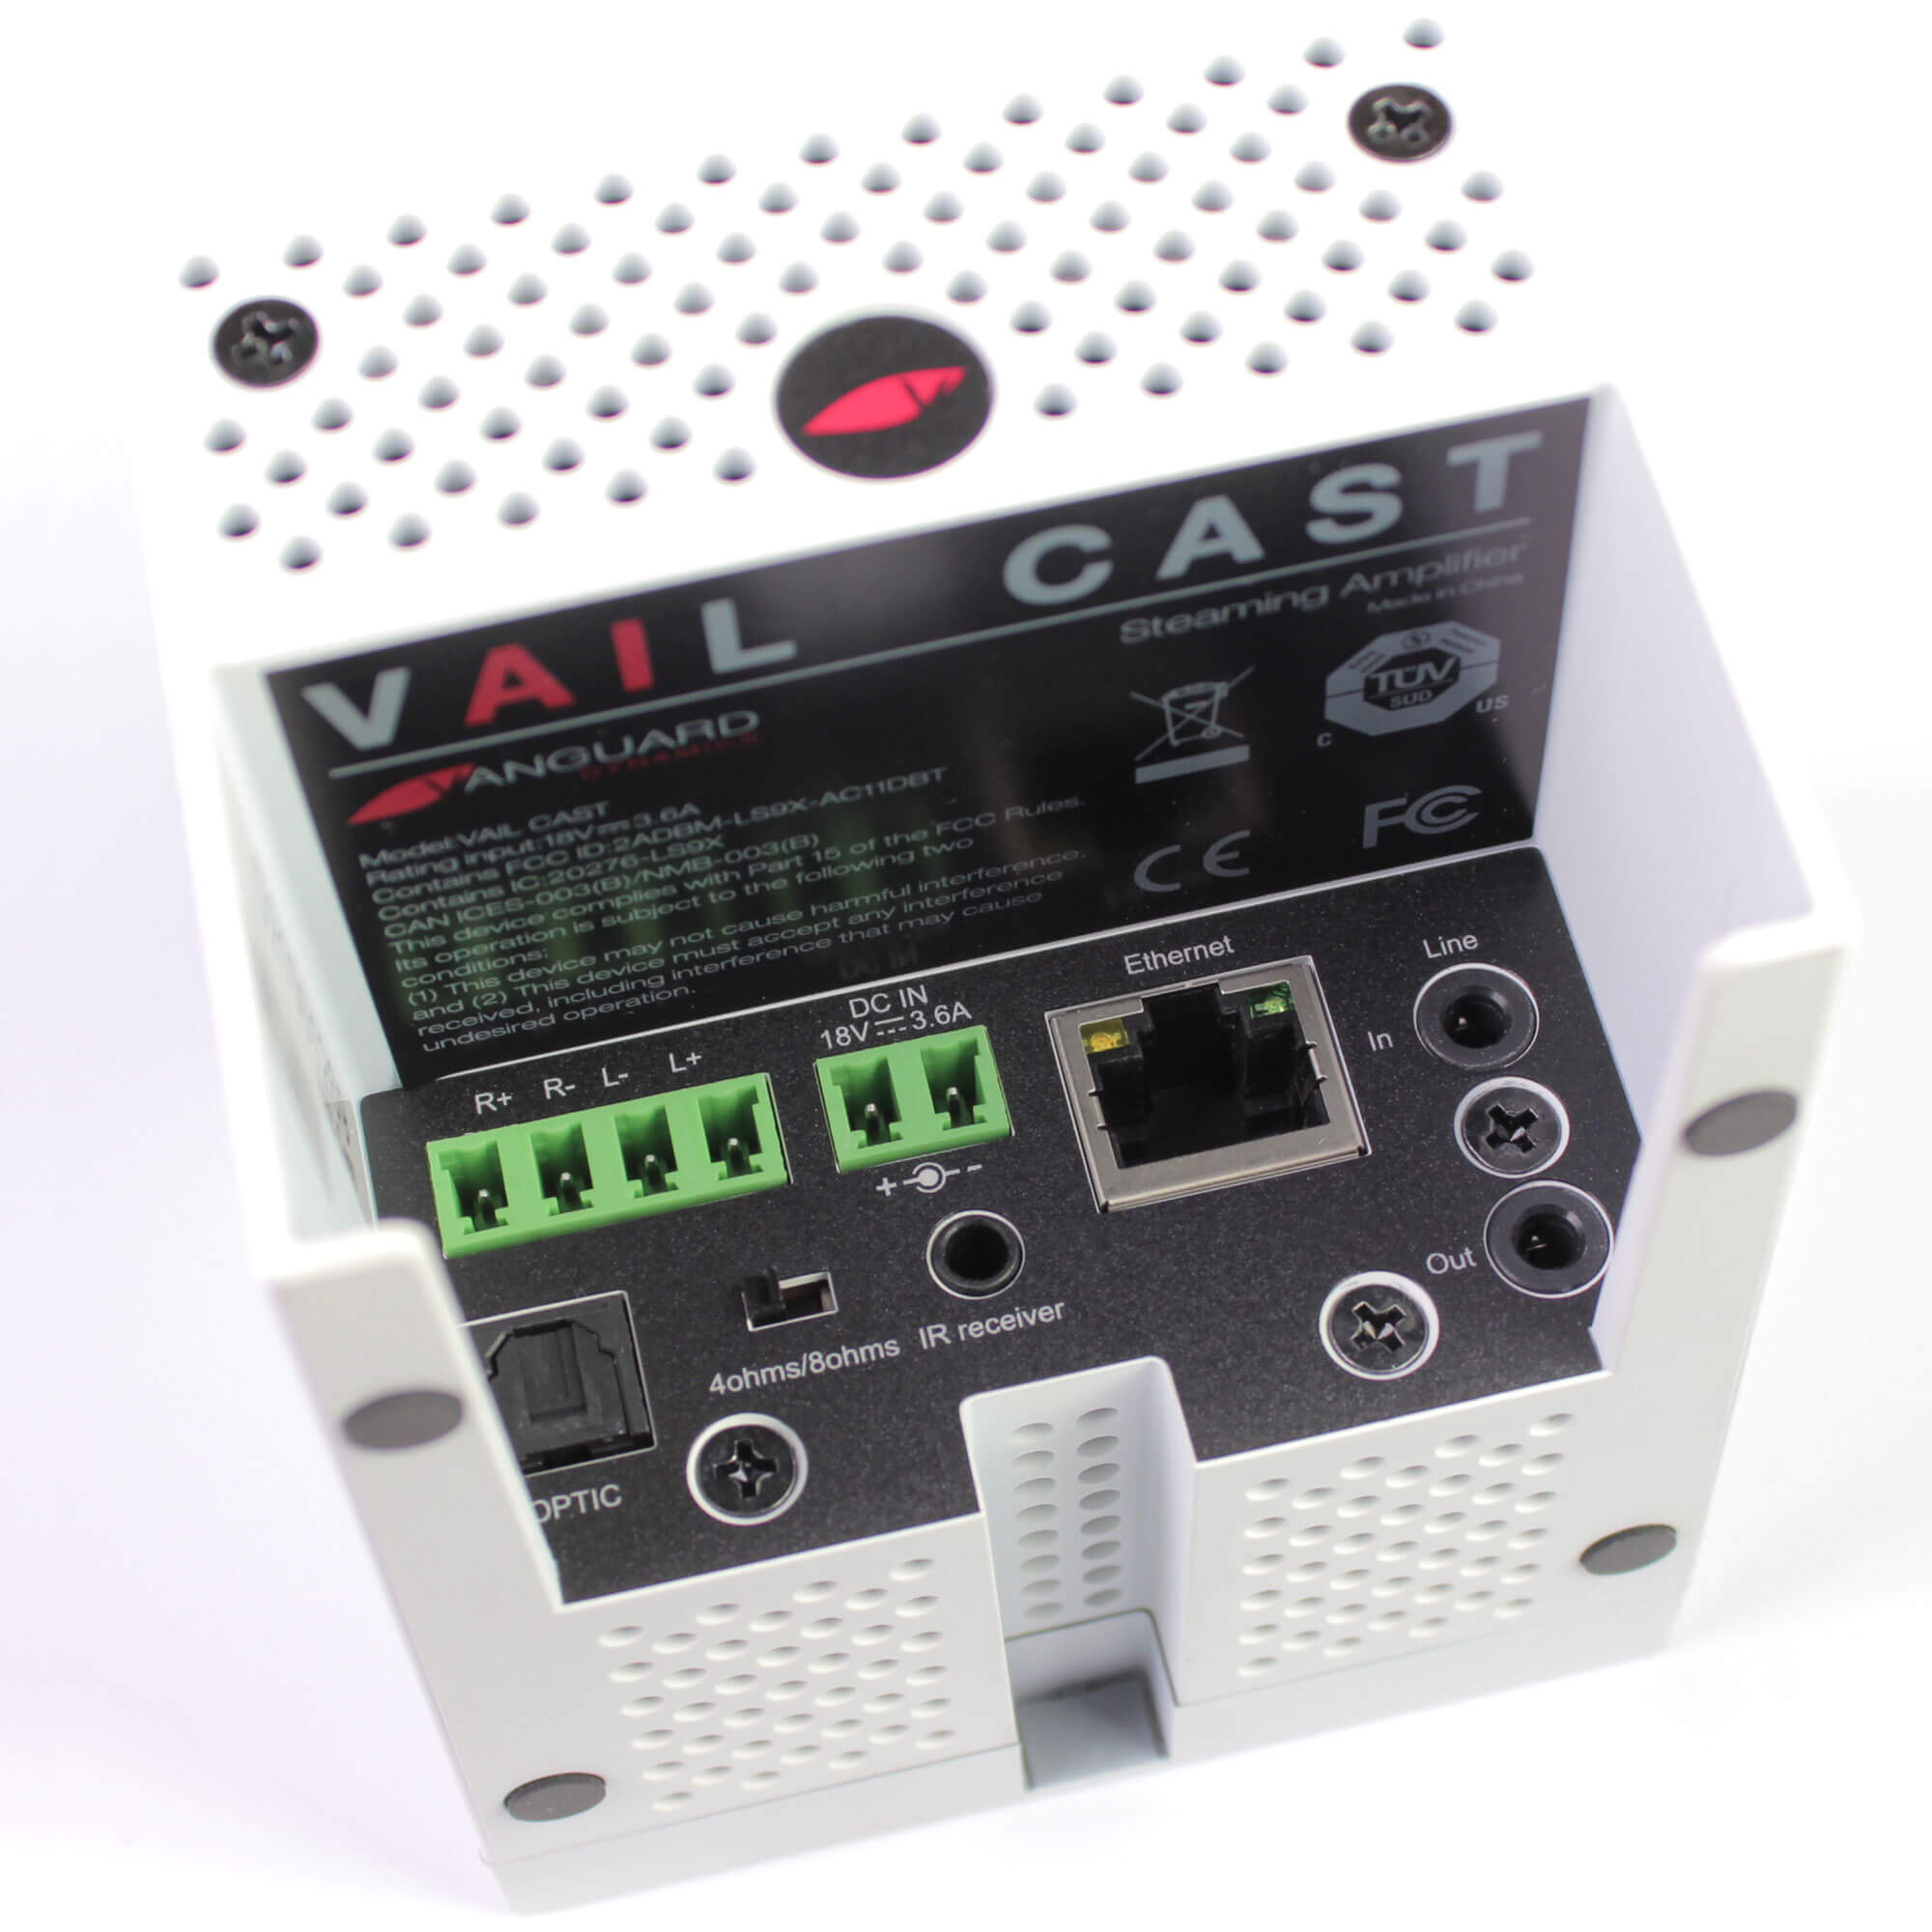 VAIL Cast universal streaming amplifier back